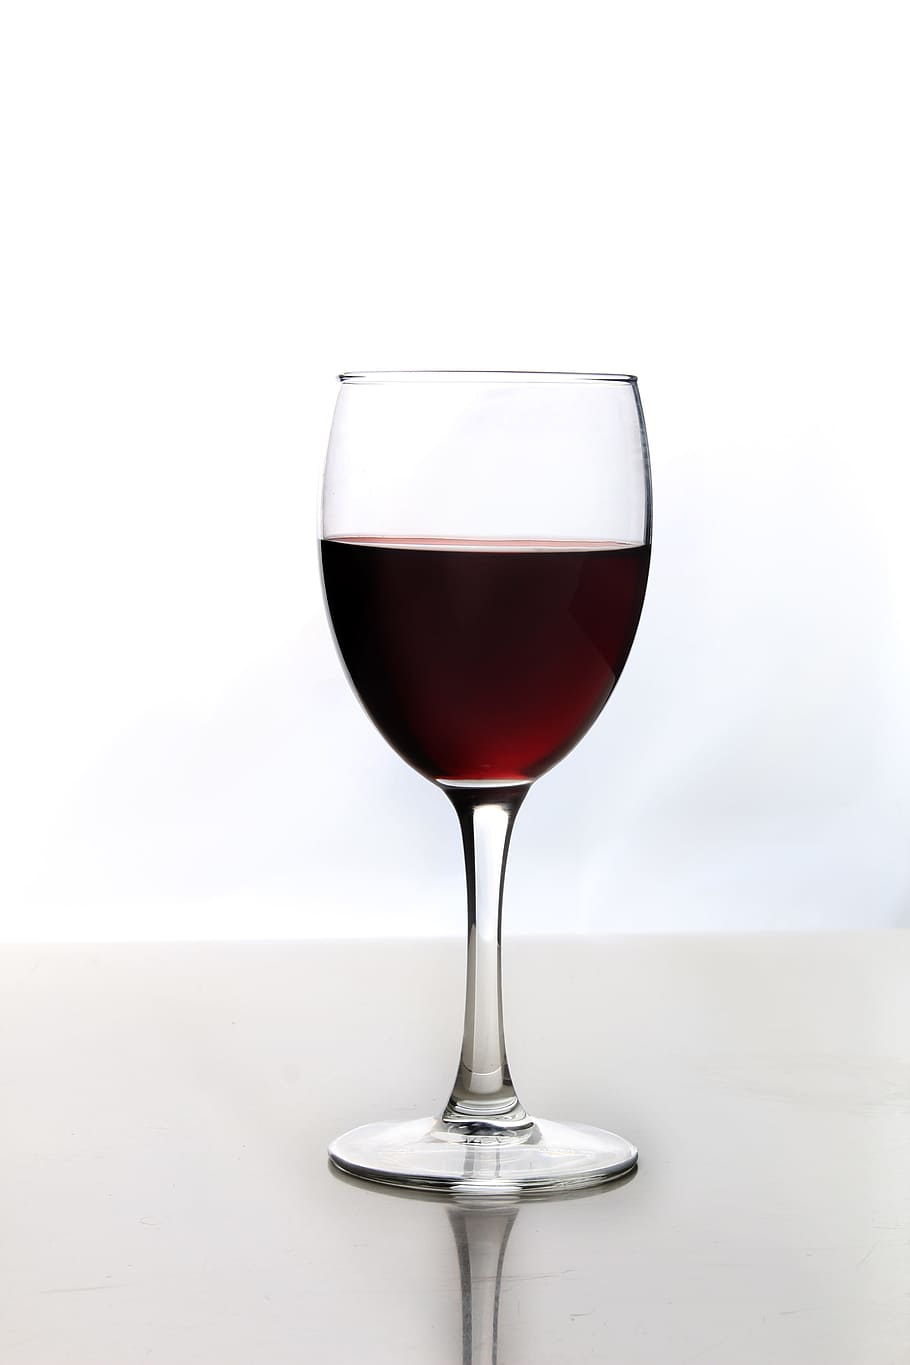 long-stem glass with wine on white surface, Wine, Glass, Beverage, HD wallpaper